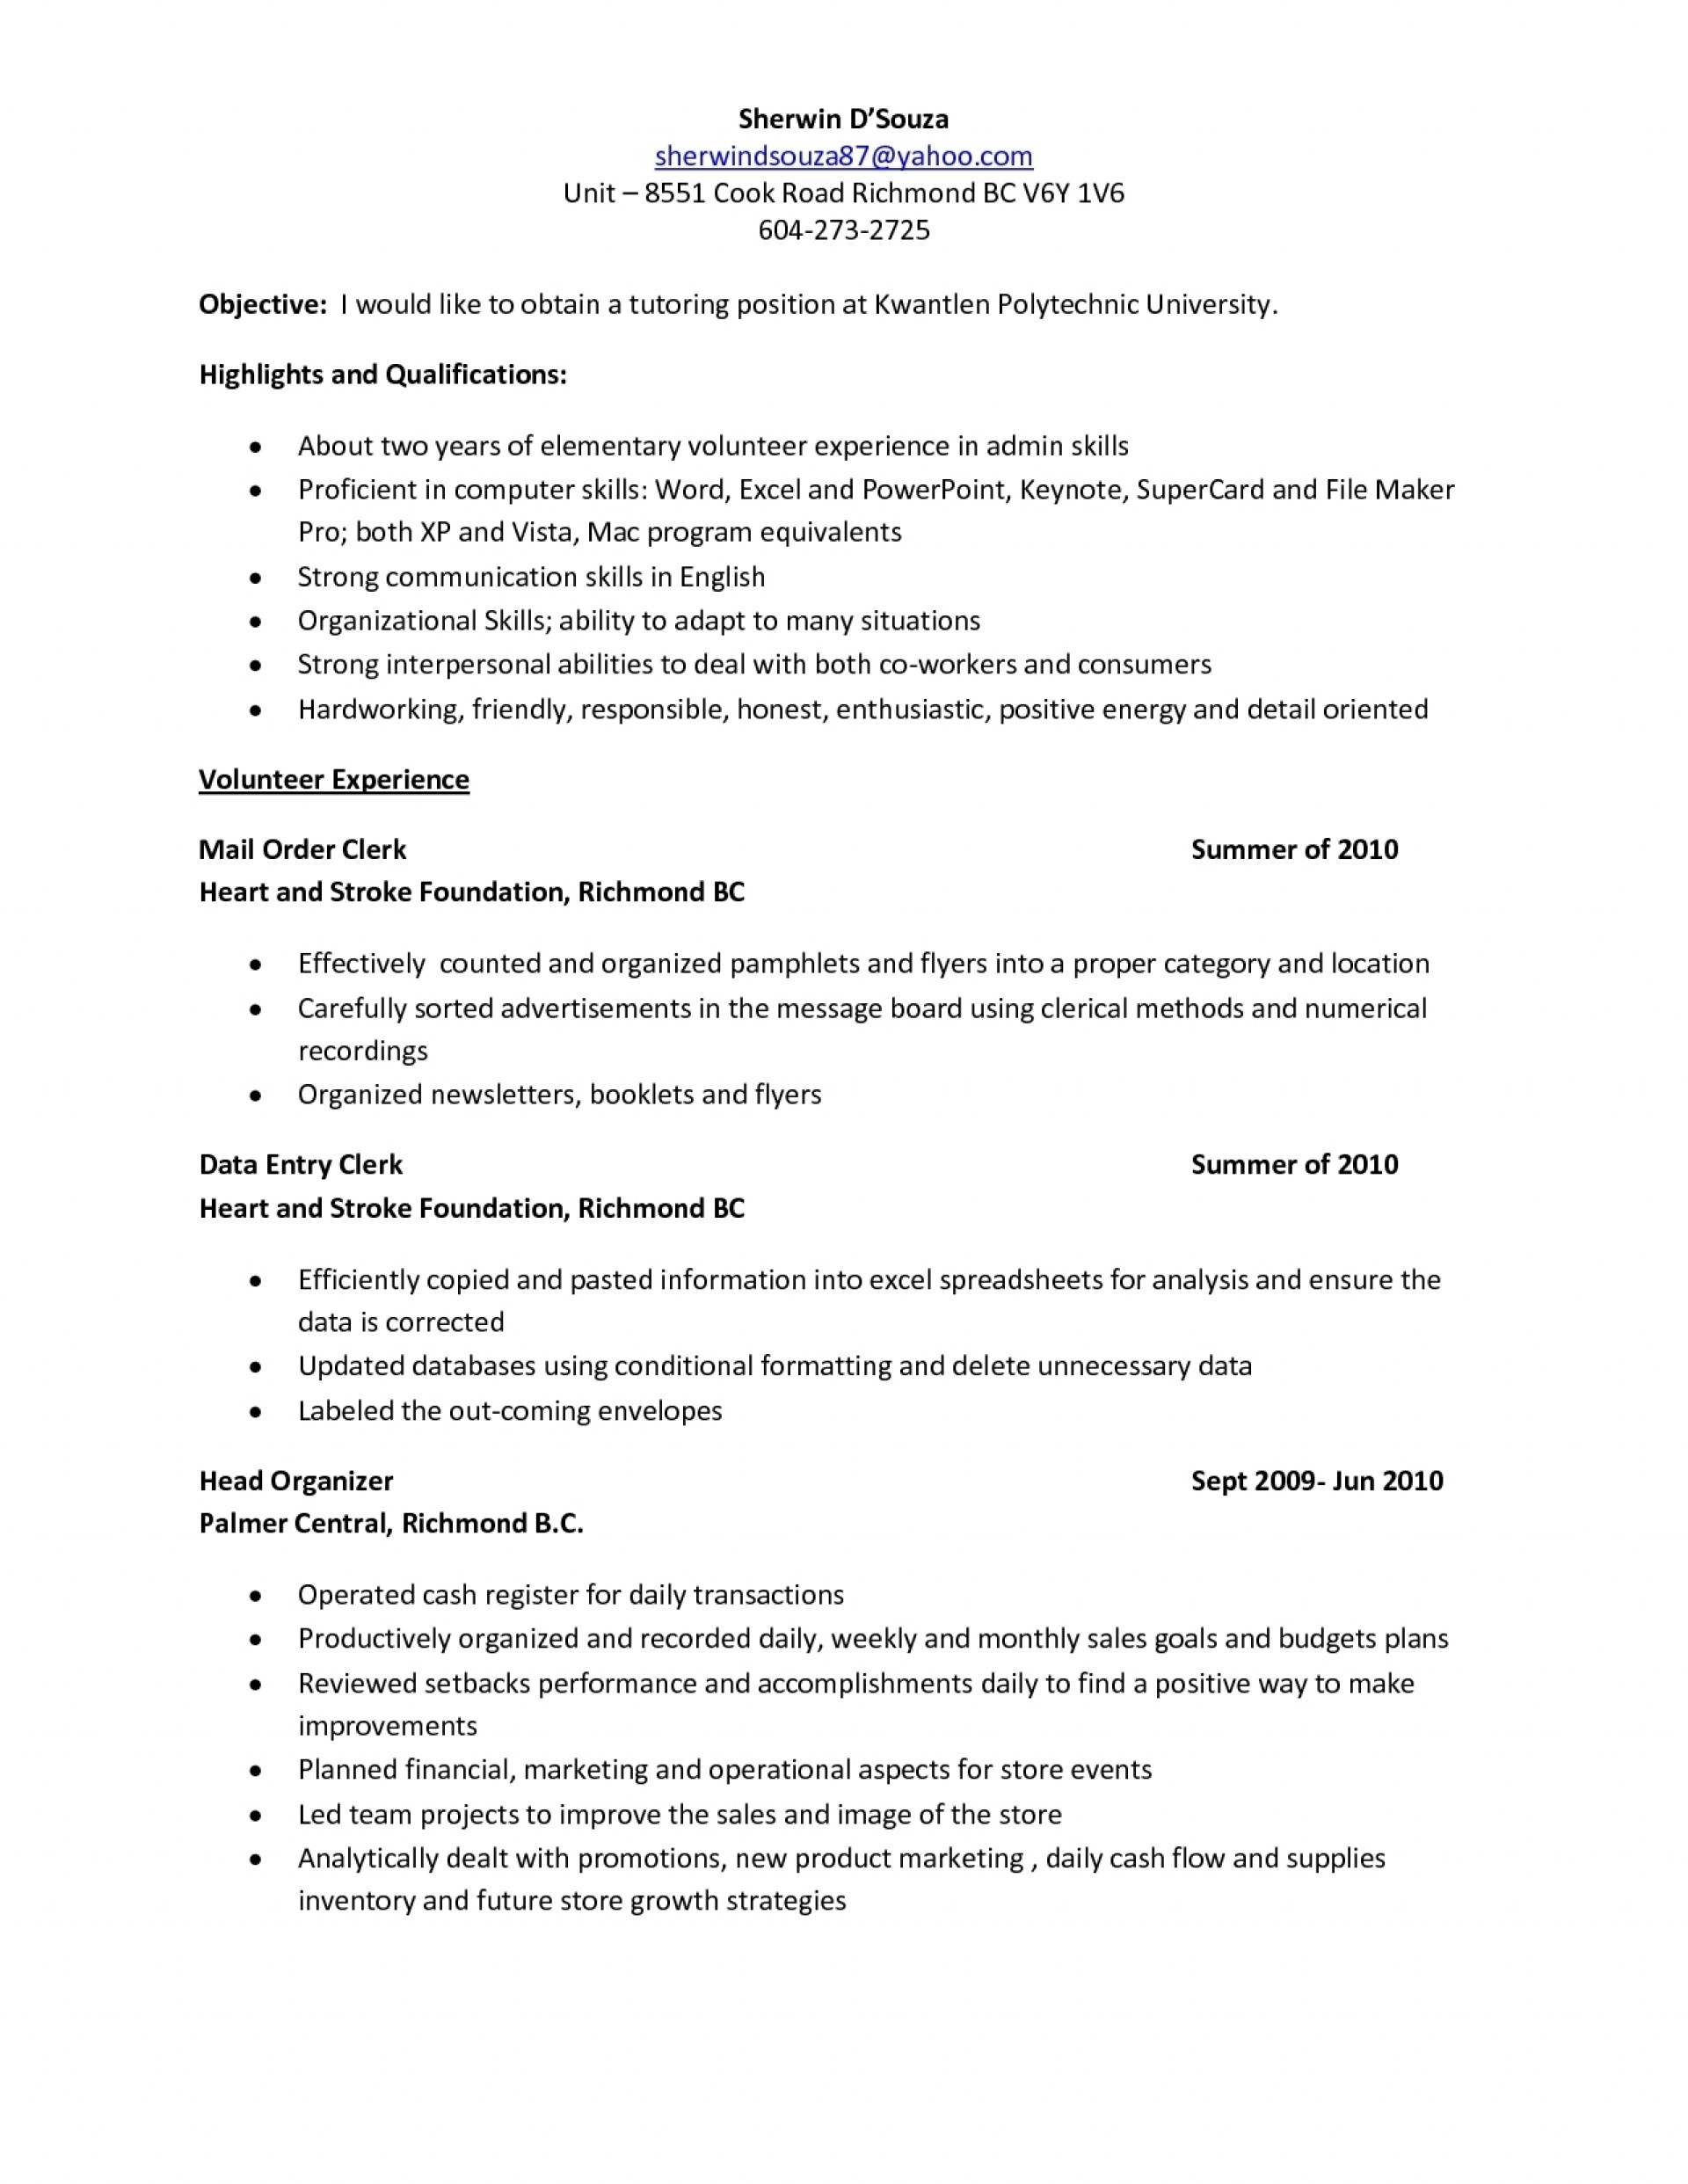 021 Tutor Lesson Plan Template Resume Sample Math Vixaan Get More within Tutoring Template To Fill Out Weekly